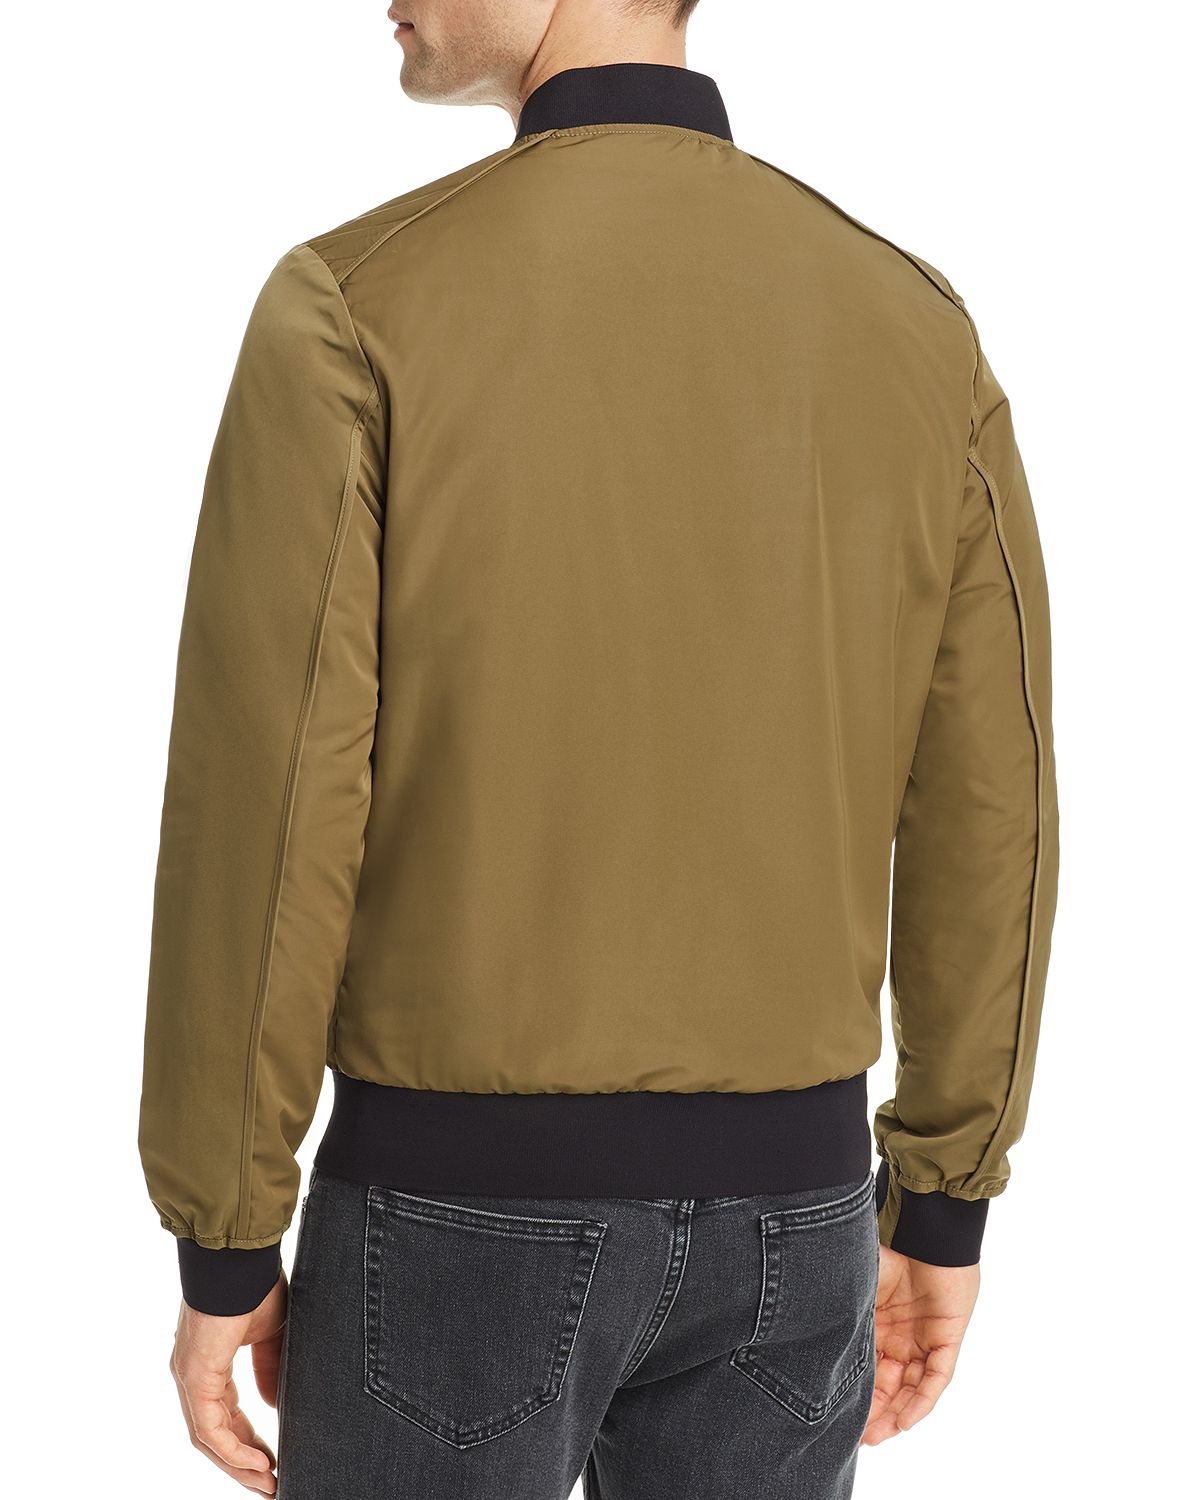 Pacific & Park Bomber Jacket Olive | CheapUndies